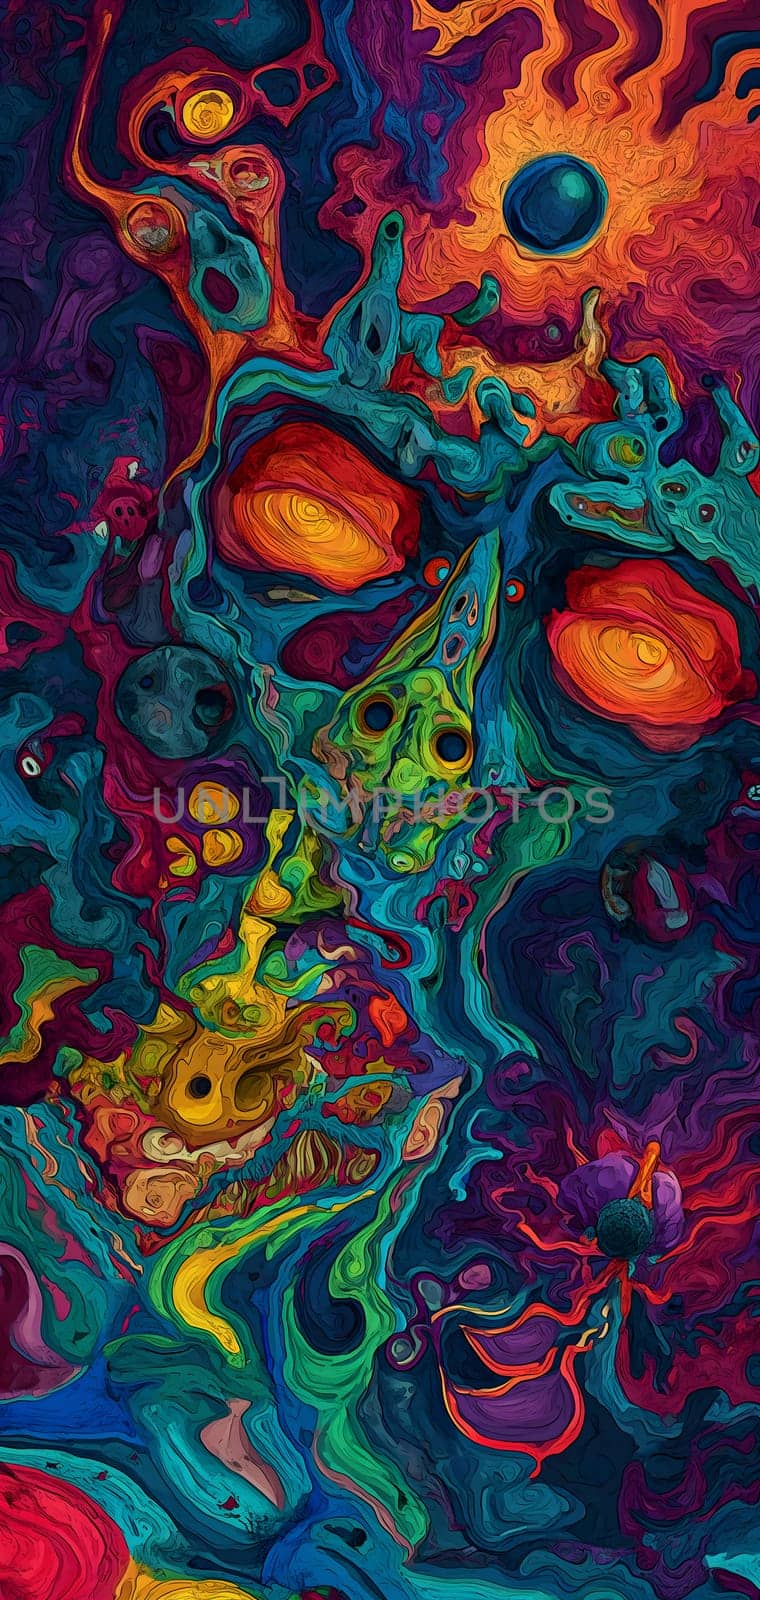 Saturated colorful mad abstract background, random different shapes and objects, hallucinations of ancient shaman after mushroom overdose. Neural network generated image. Not based on any actual scene or pattern.